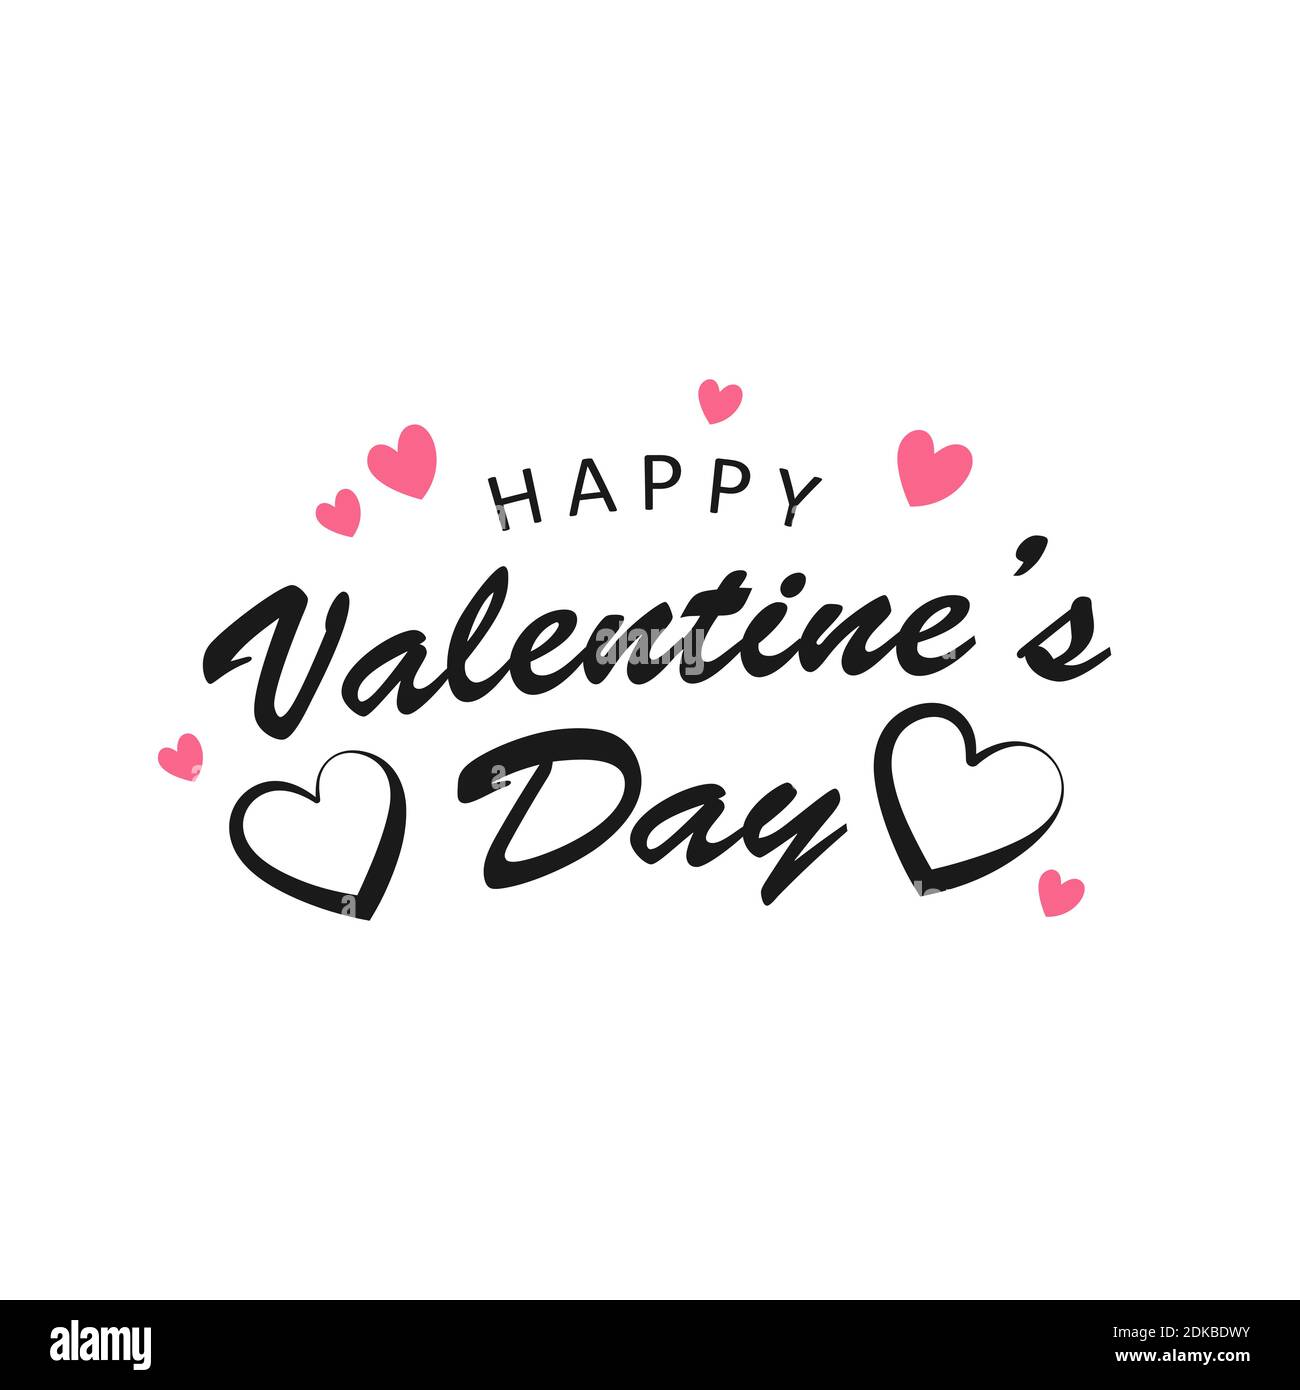 Happy Valentines Day Vector Poster With Handwritten Calligraphy Text And Hearts Stock Vector